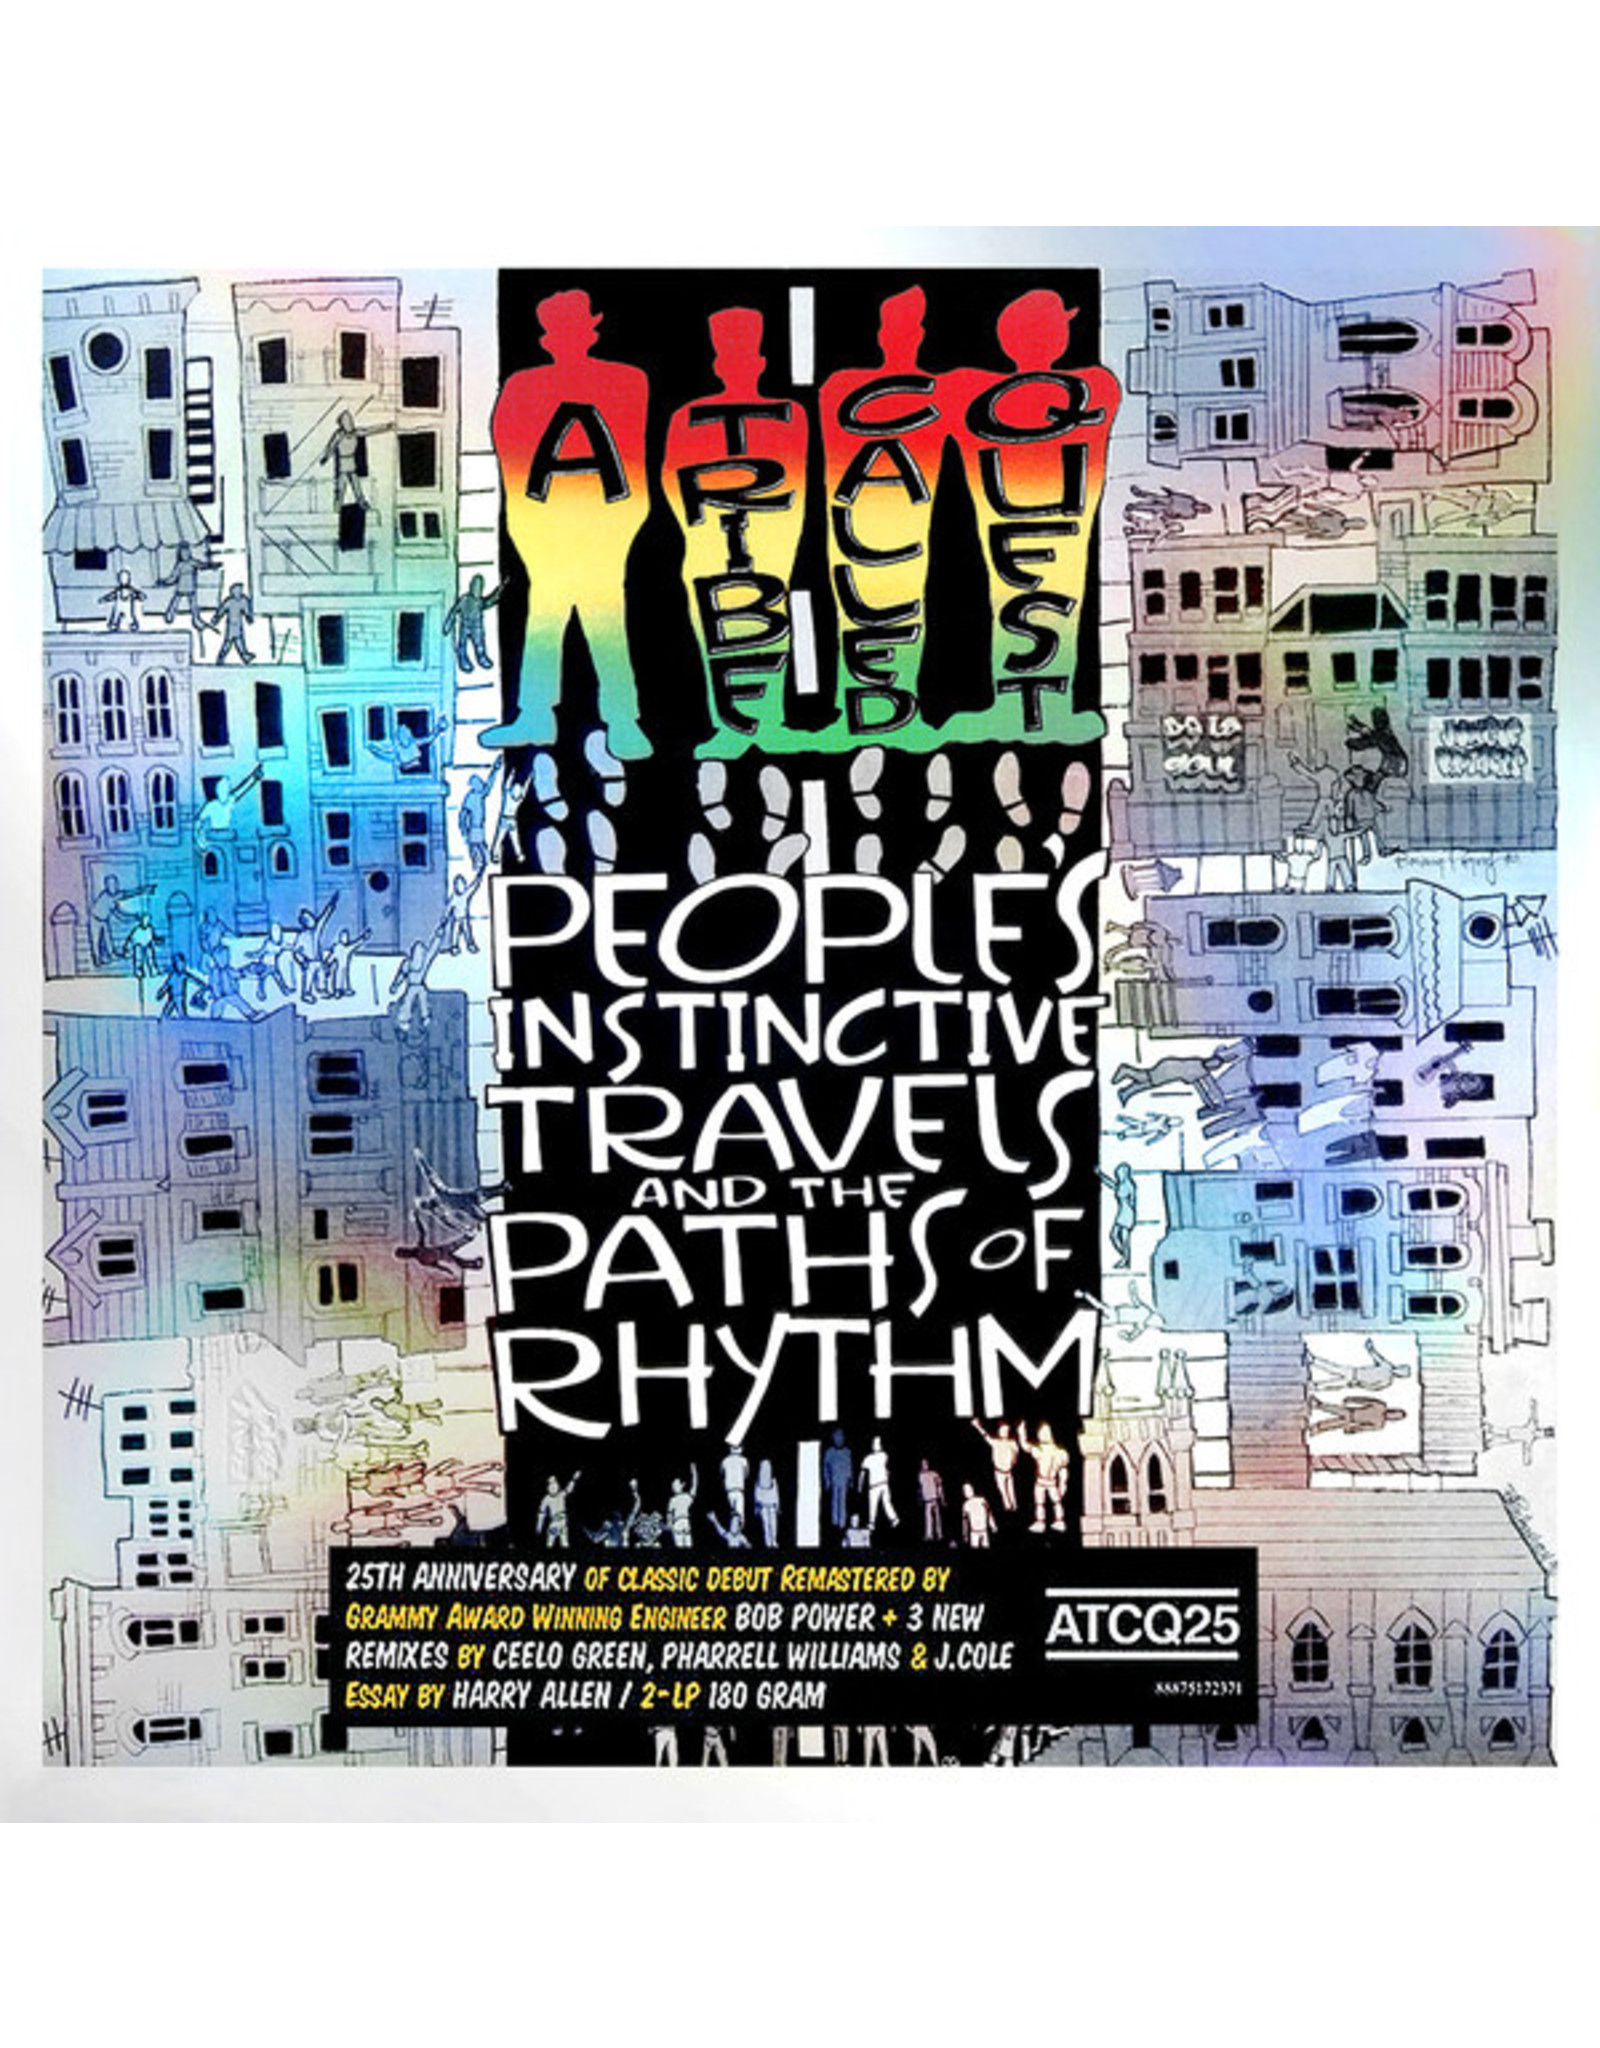 A Tribe Called Quest - People's Instinctive Travels & The Paths of Rhythm (25th Anniversary)